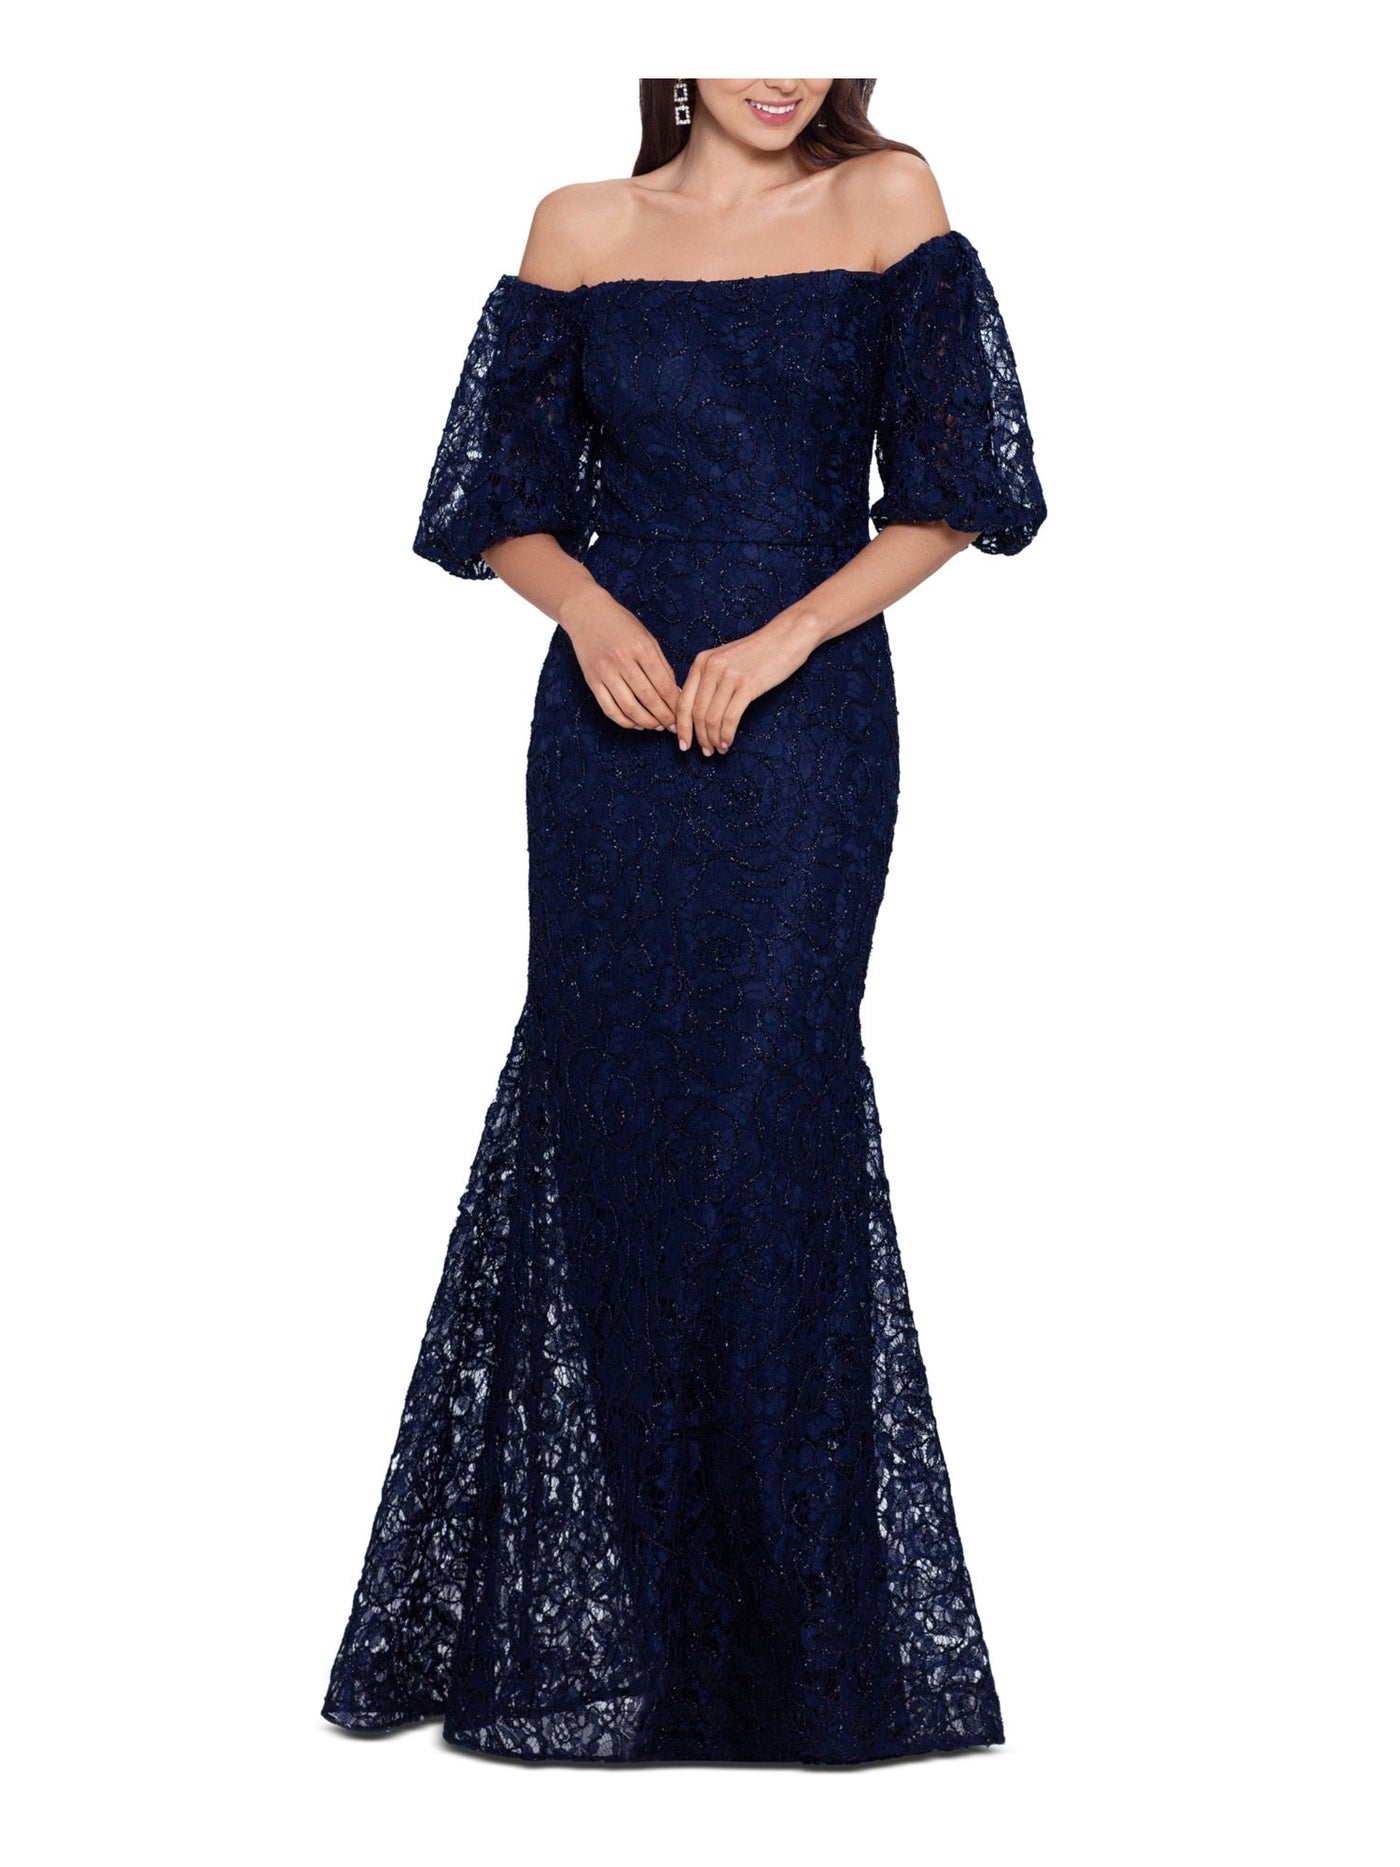 XSCAPE Womens Navy Zippered Embellished Fitted Textured Structured Pouf Sleeve Off Shoulder Full-Length Evening Gown Dress 4